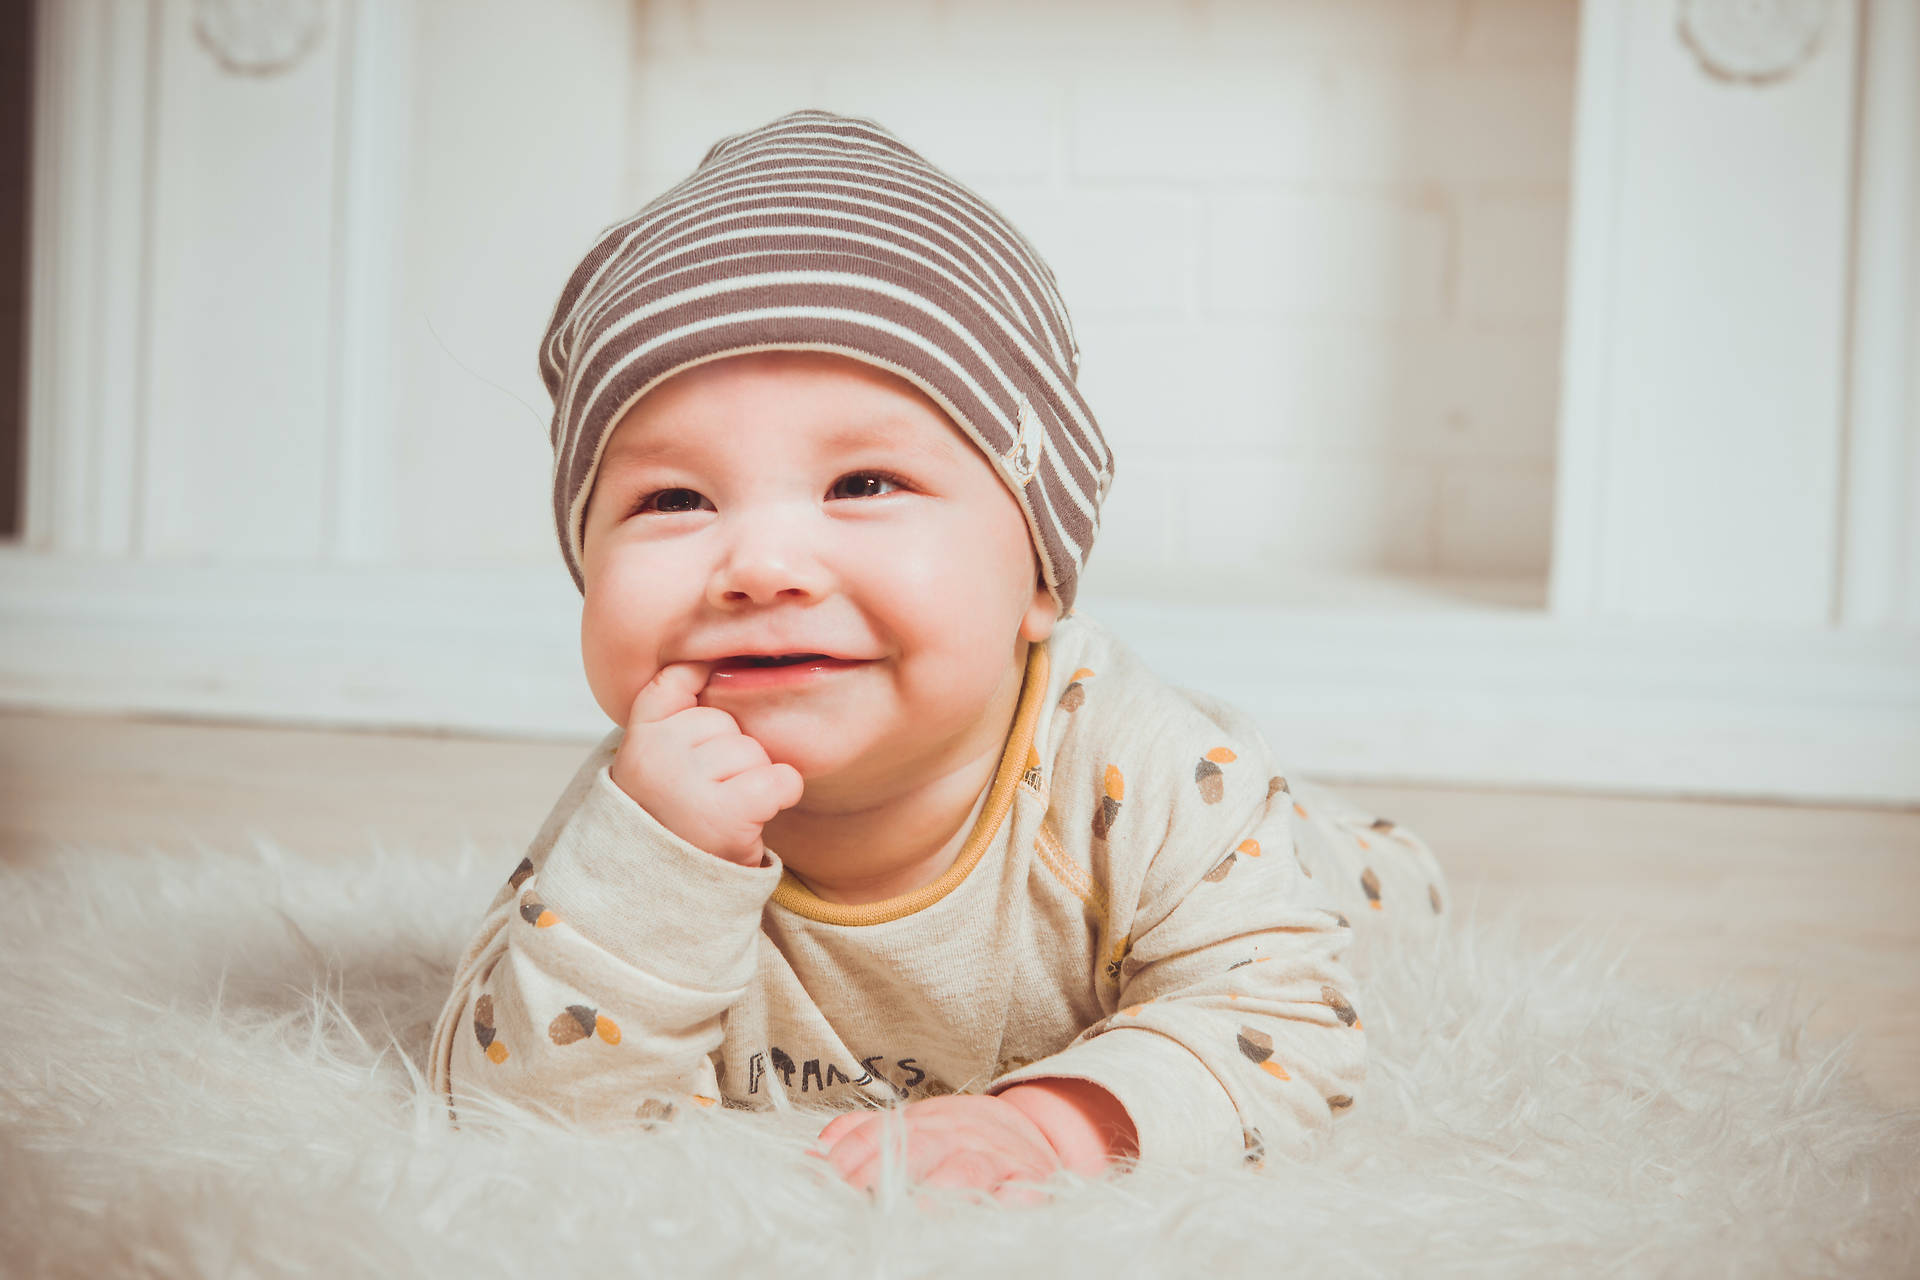 Cute Baby In Pajamas And Bonnet Wallpaper